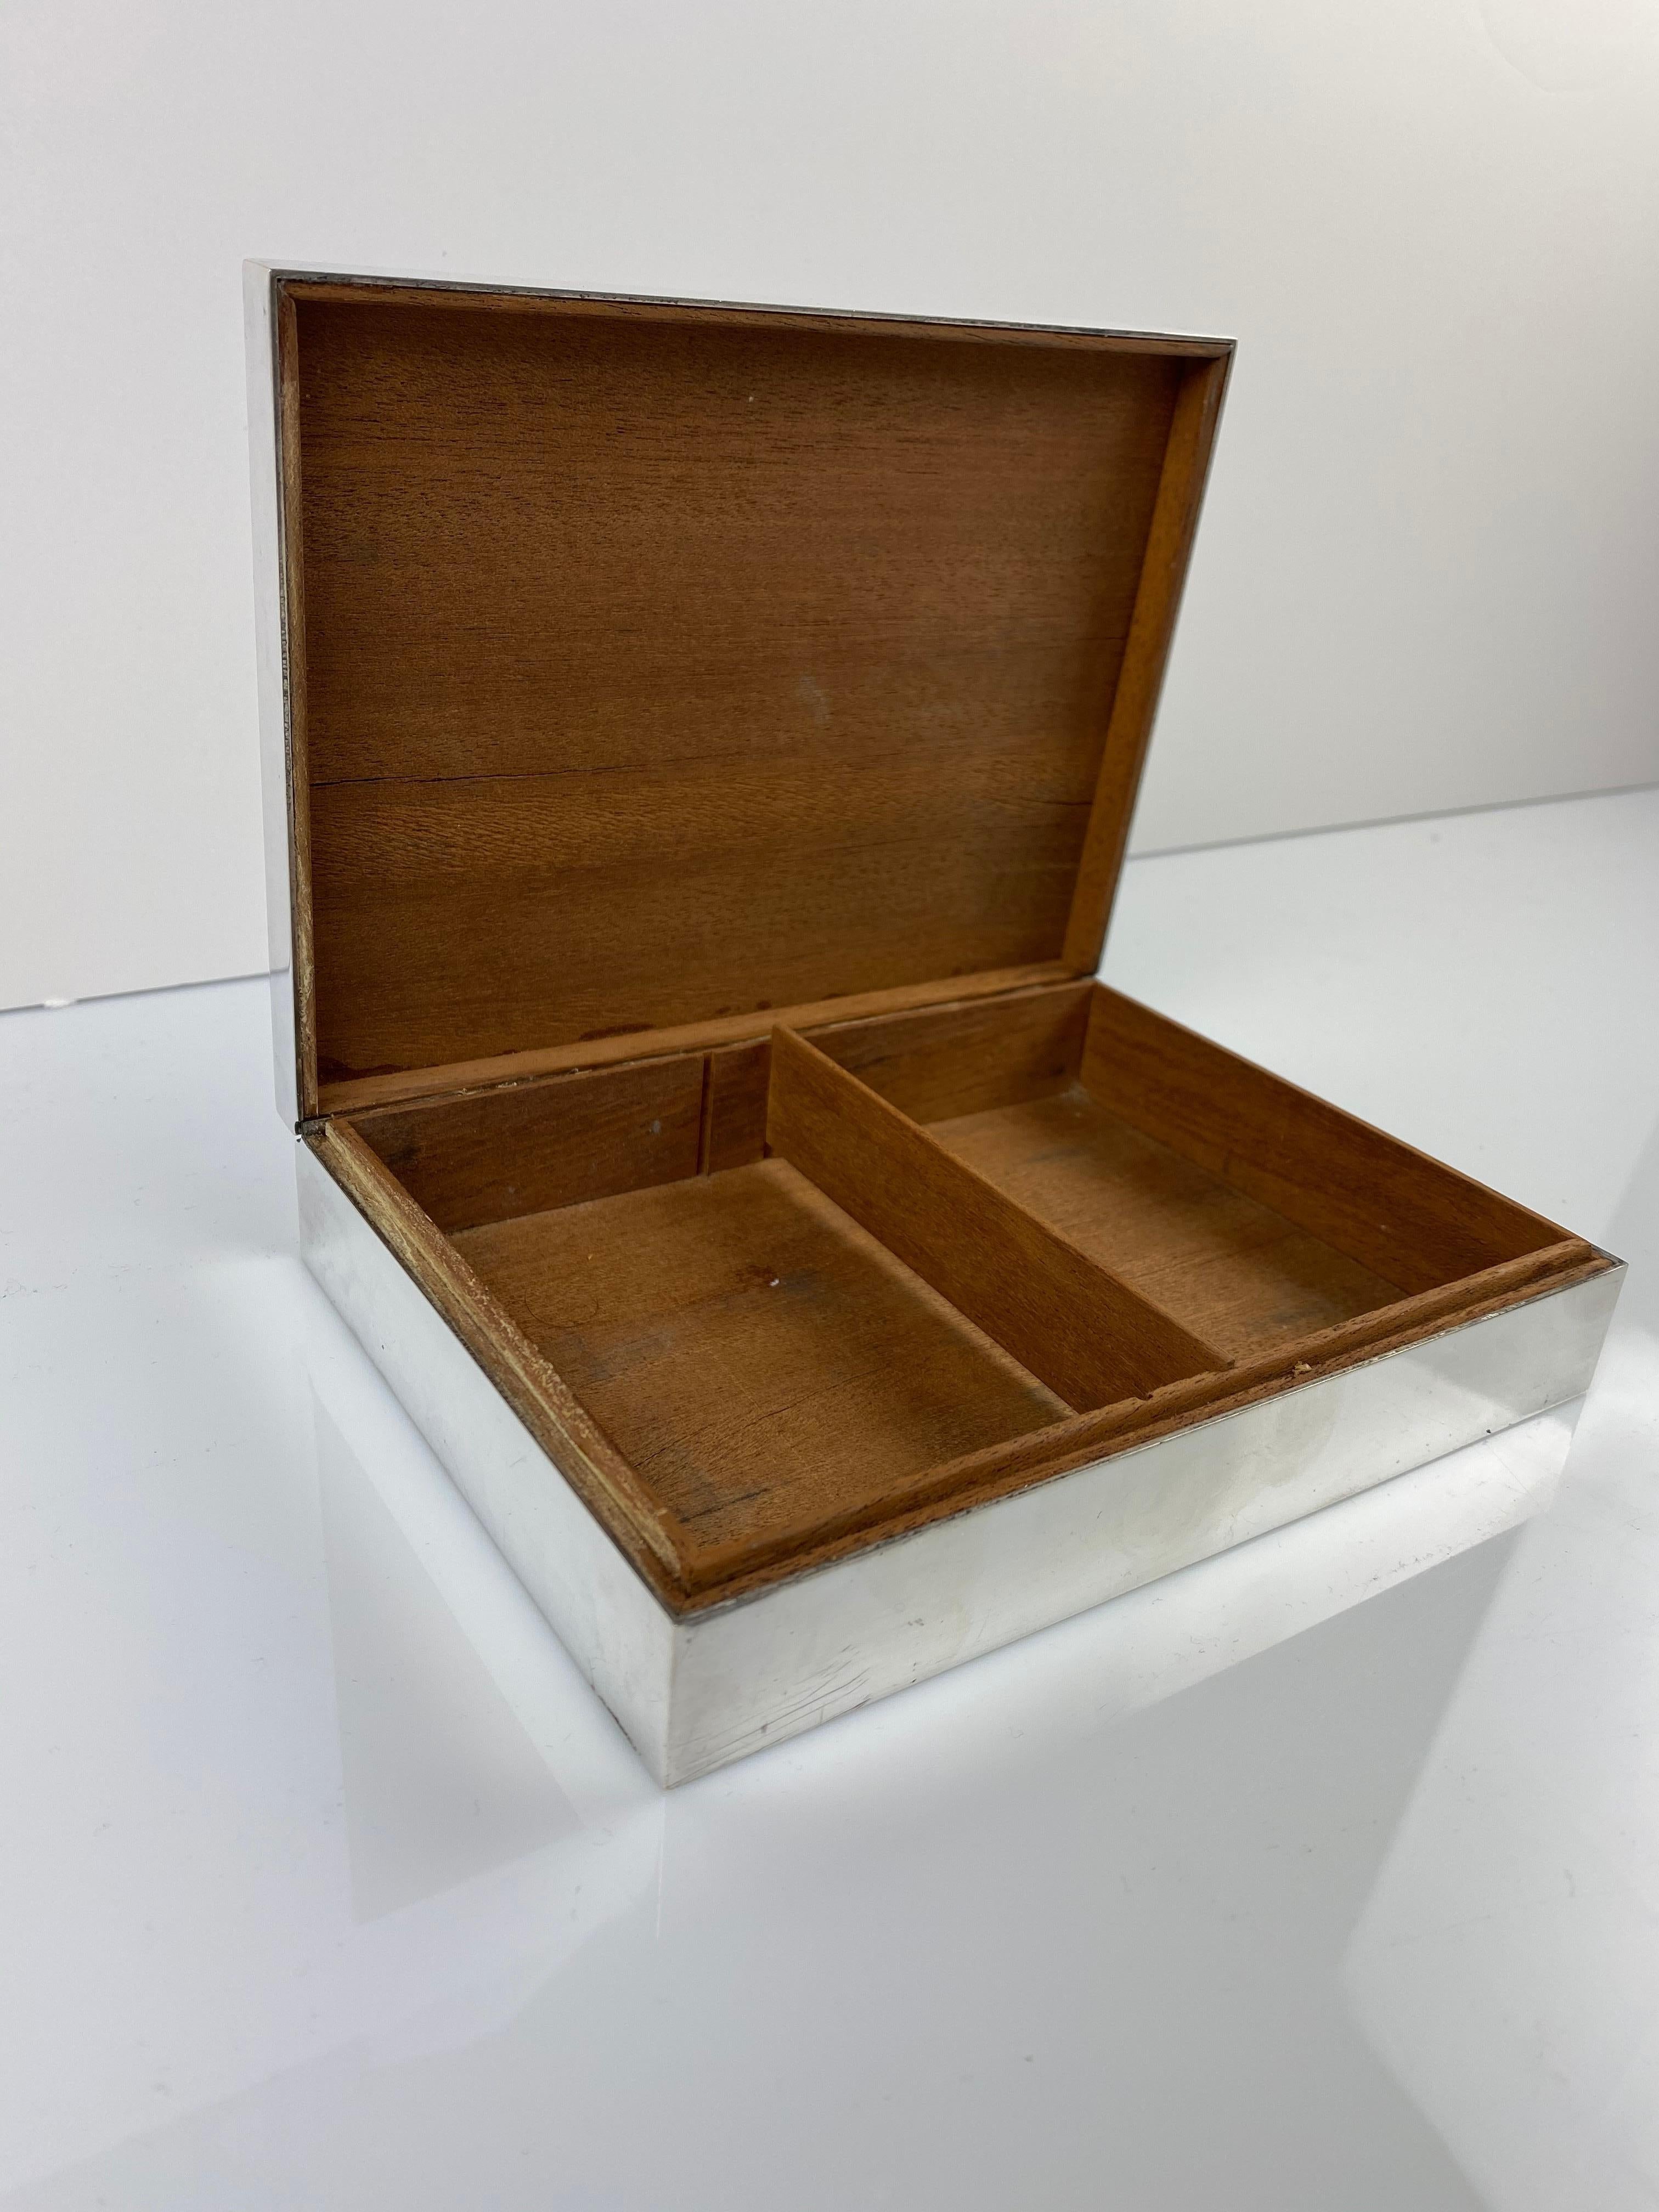 A rare and elegant box by Hermès, featuring an engine-turned top surface and 2 shotgun cartridges.